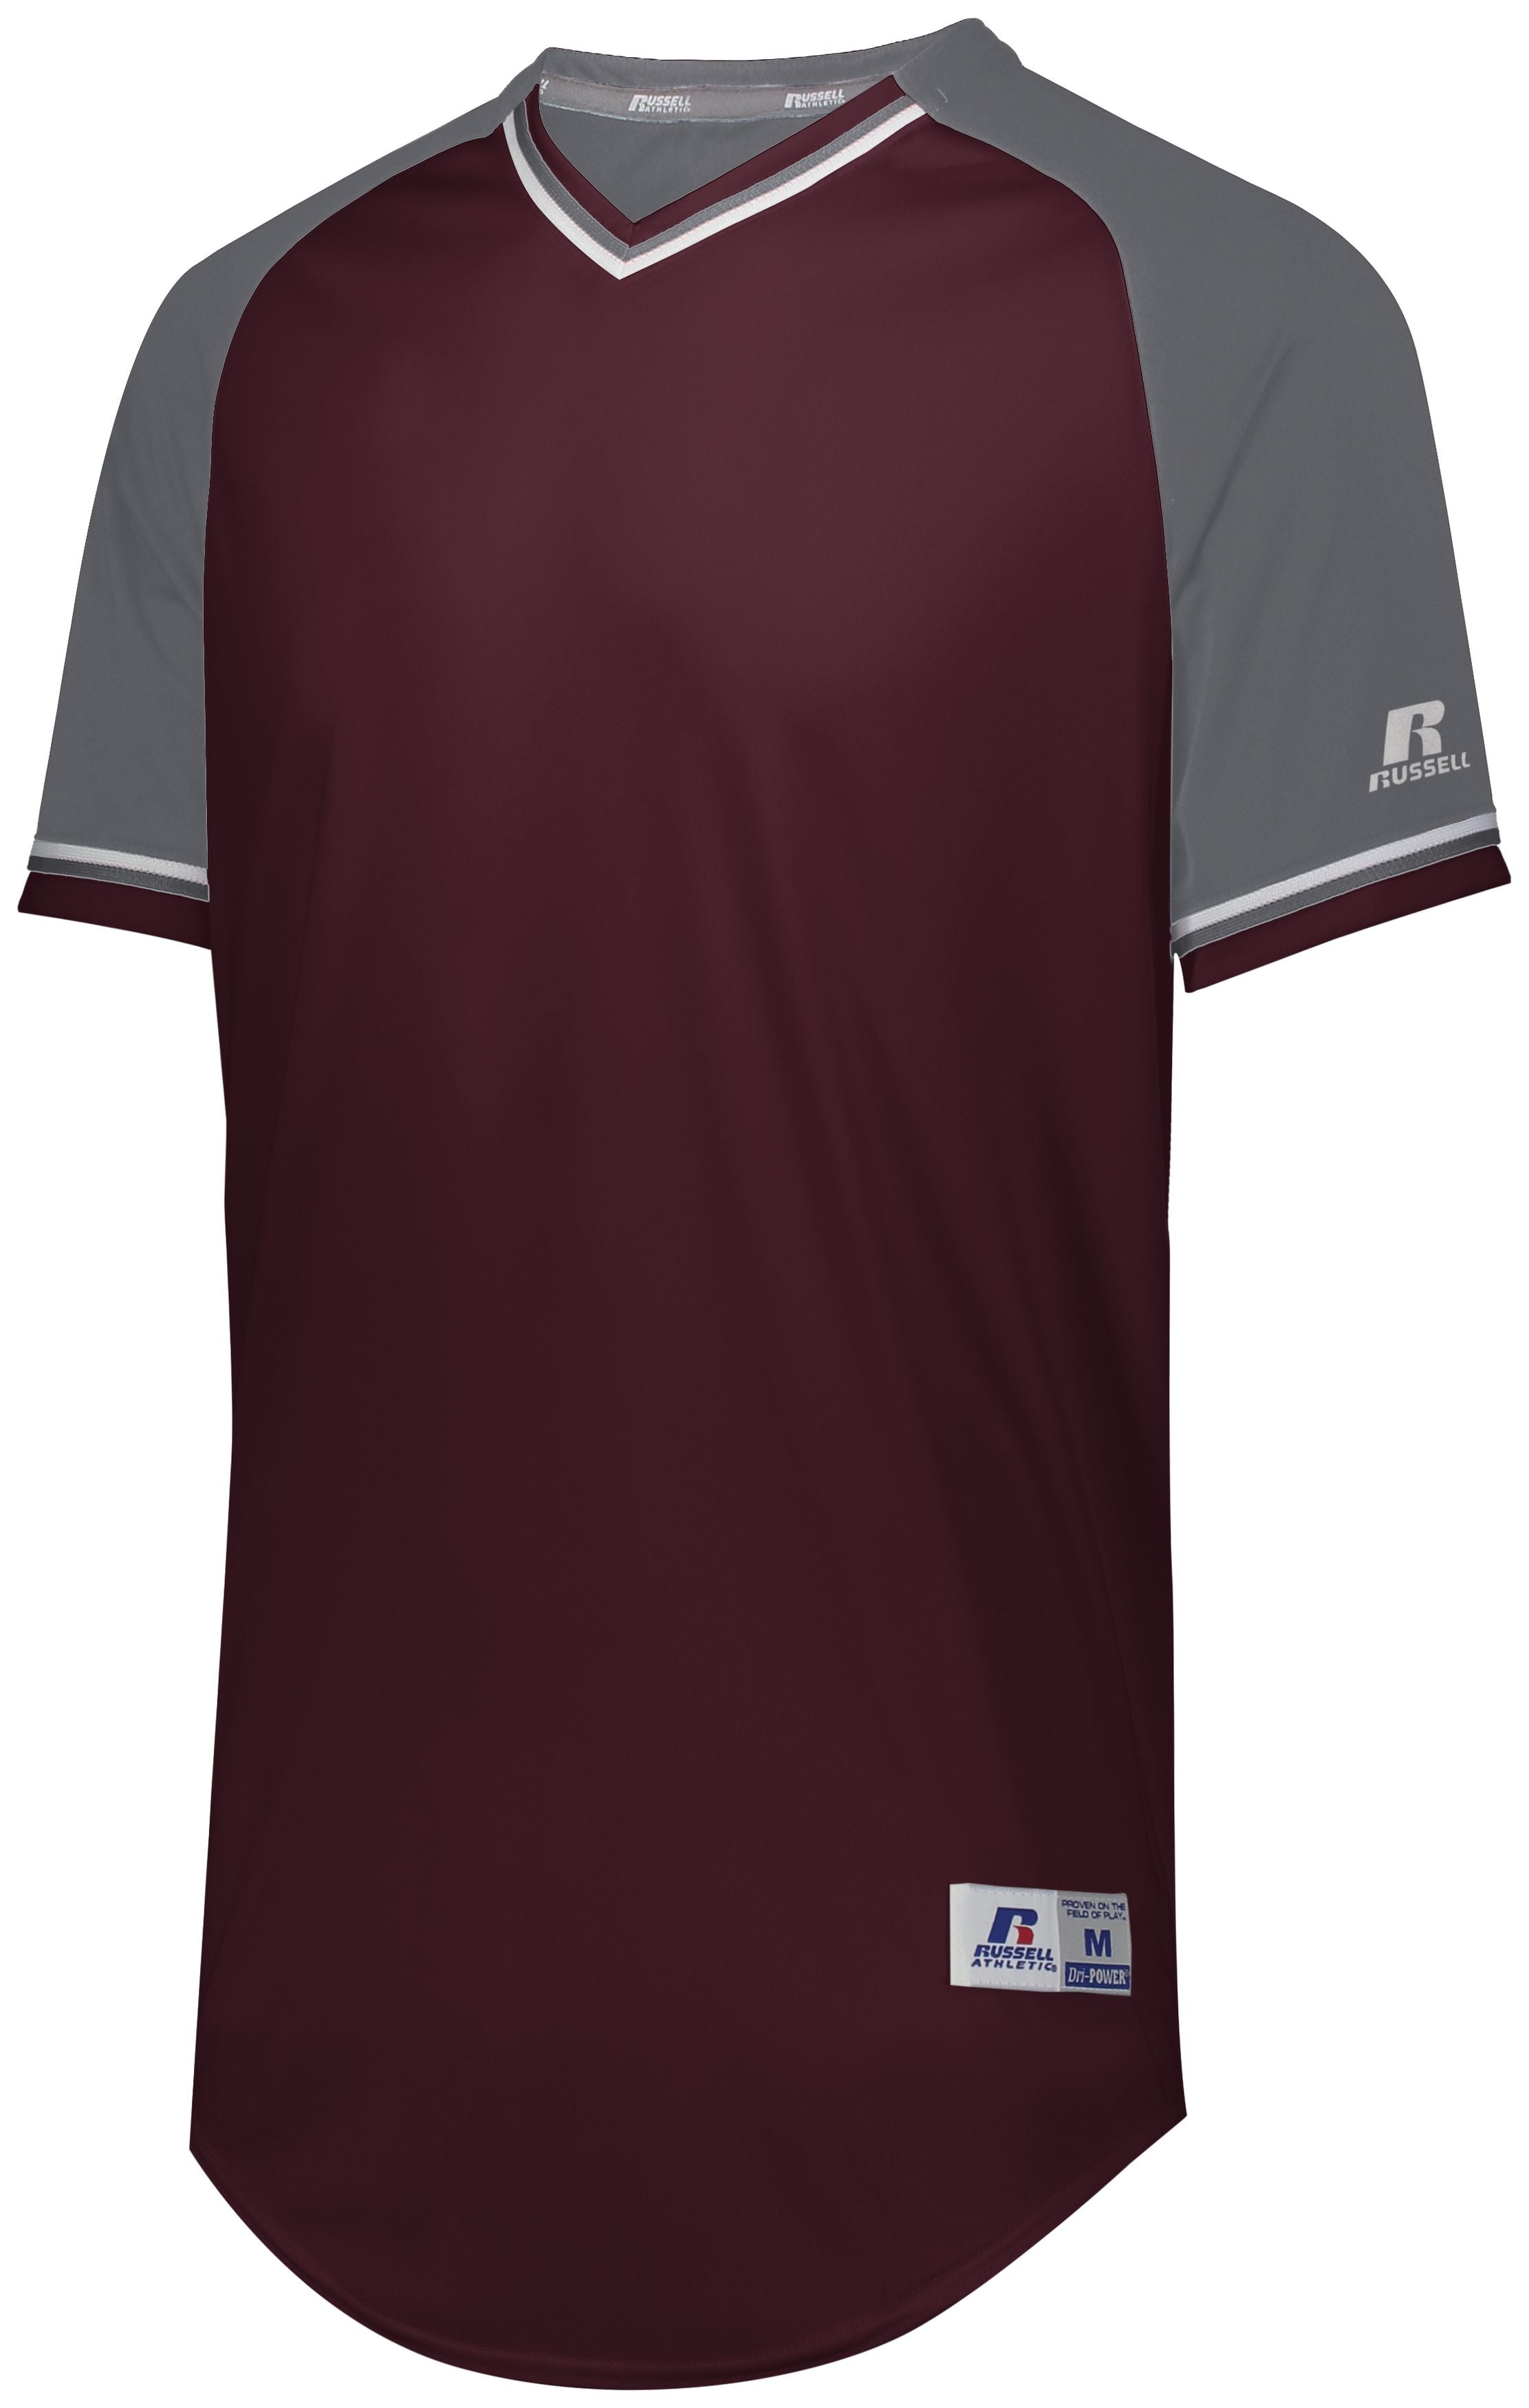 Russell Athletic Youth Classic V-Neck Jersey in Maroon/Steel/White  -Part of the Youth, Youth-Jersey, Baseball, Russell-Athletic-Products, Shirts, All-Sports, All-Sports-1 product lines at KanaleyCreations.com